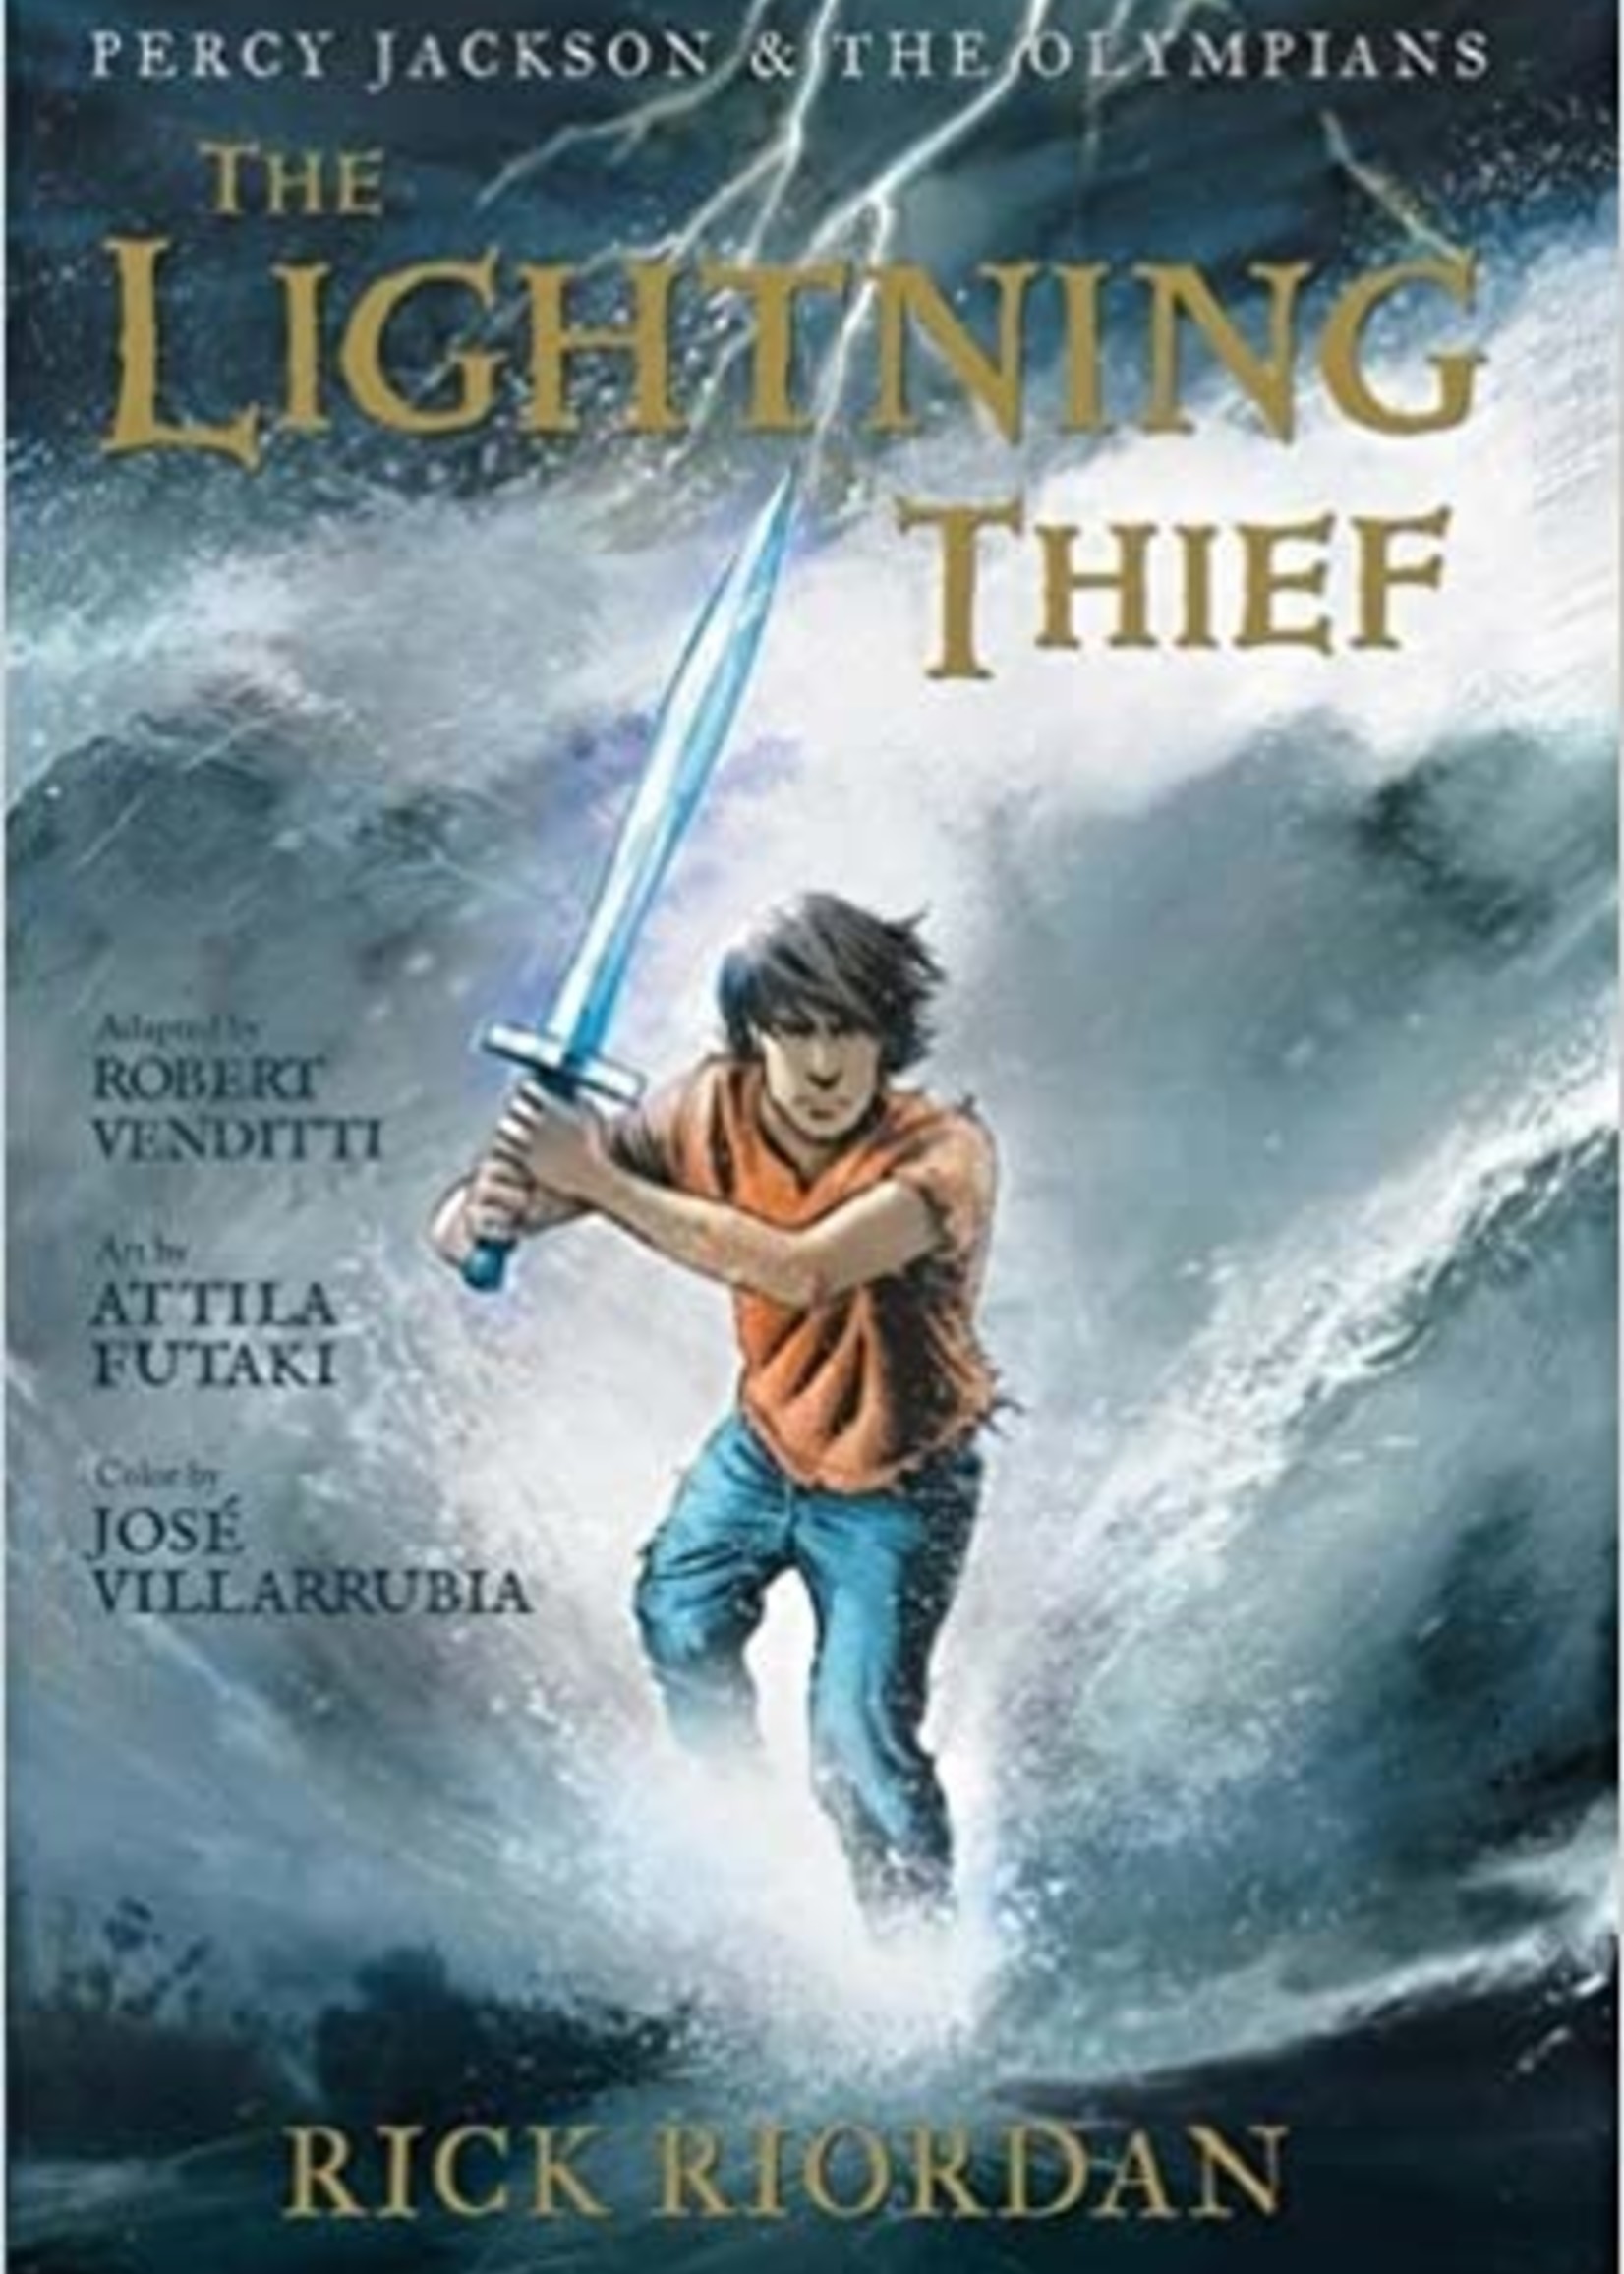 Percy Jackson and the Olympians #01, The Lightning Thief Graphic Novel - Paperback